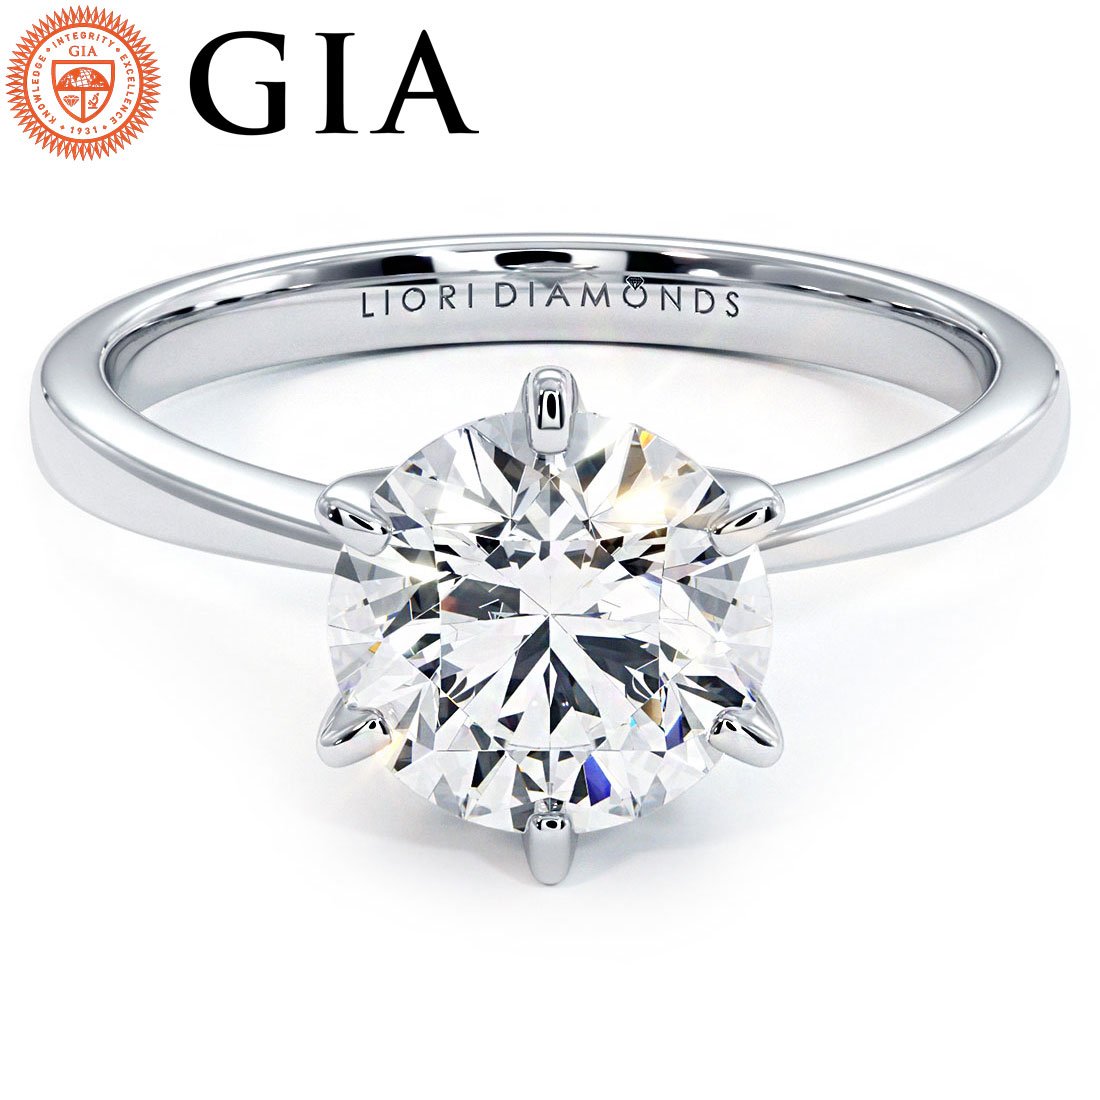 1.50ct GIA Certified F-VS1 Round Brilliant Petite Tapered 6 Prong Solitaire Lab Grown Diamond Engagement Ring set in Platinum